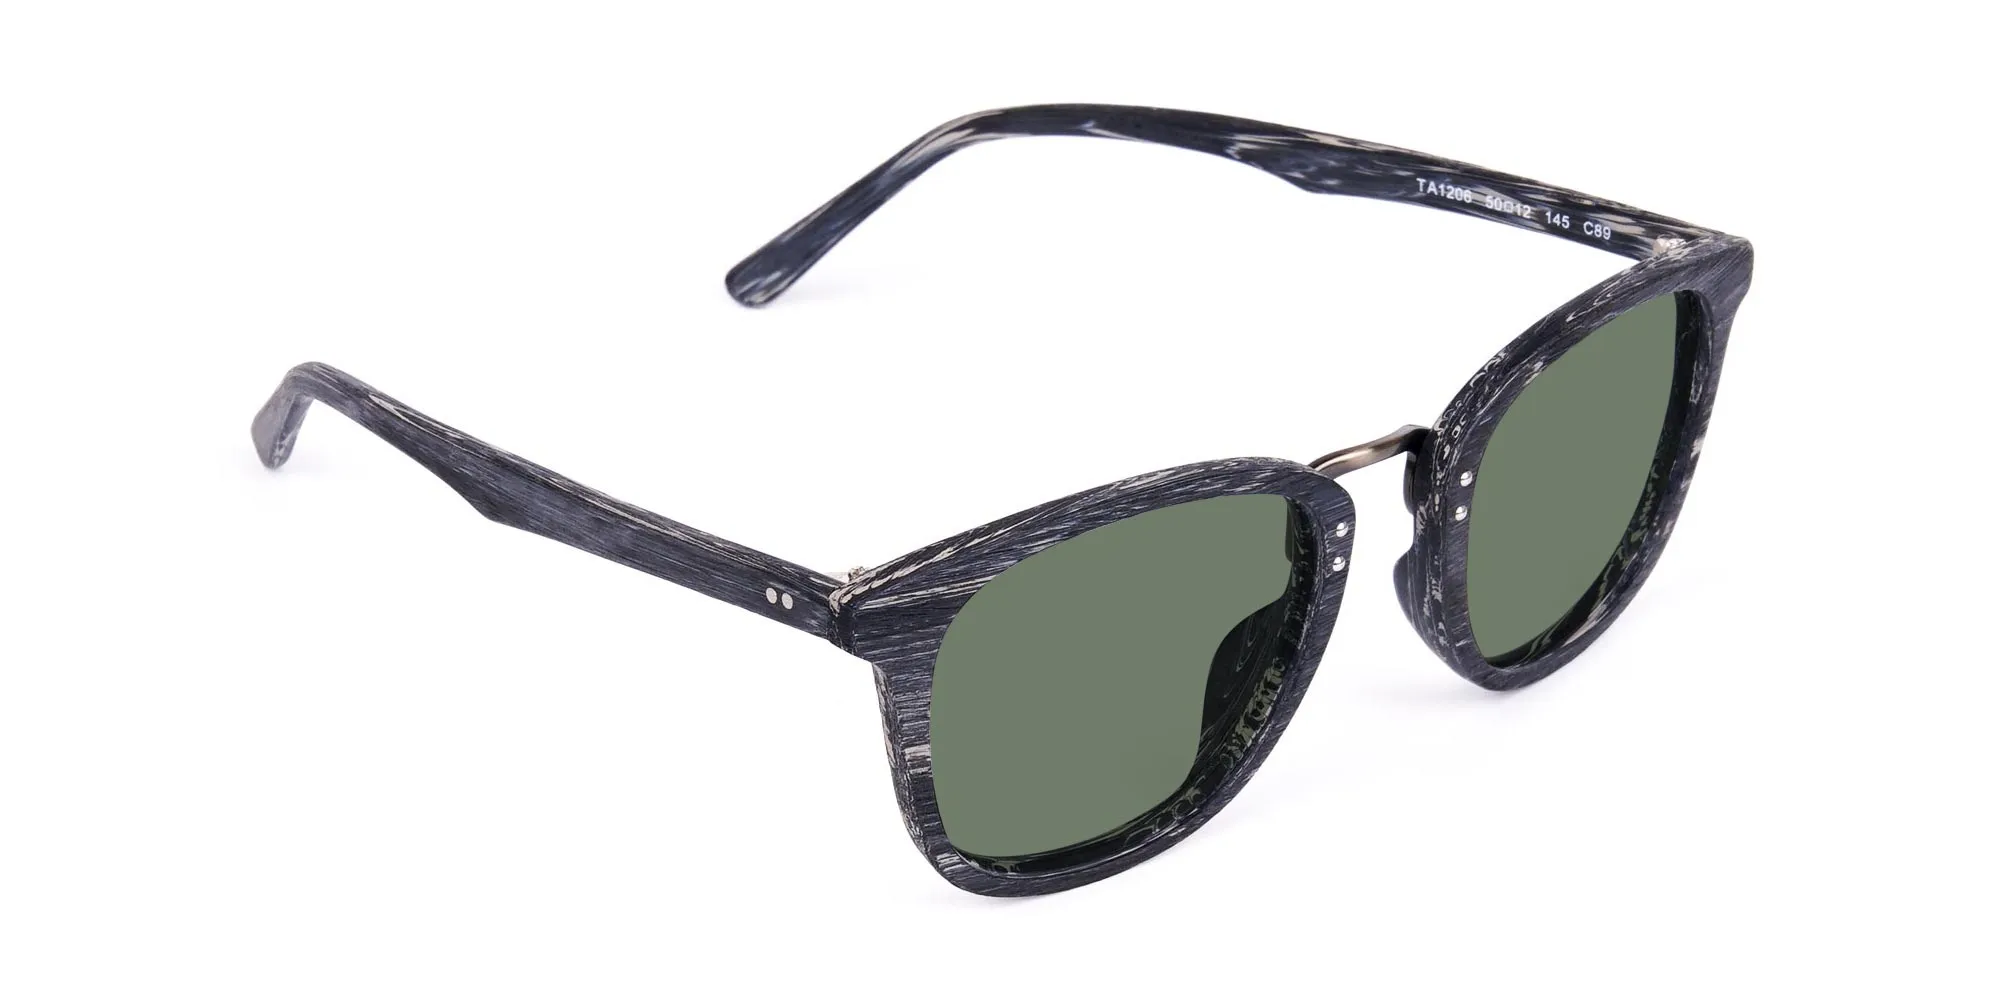 Wooden-Grey-Square-Sunglasses-with-Green-Tint-2